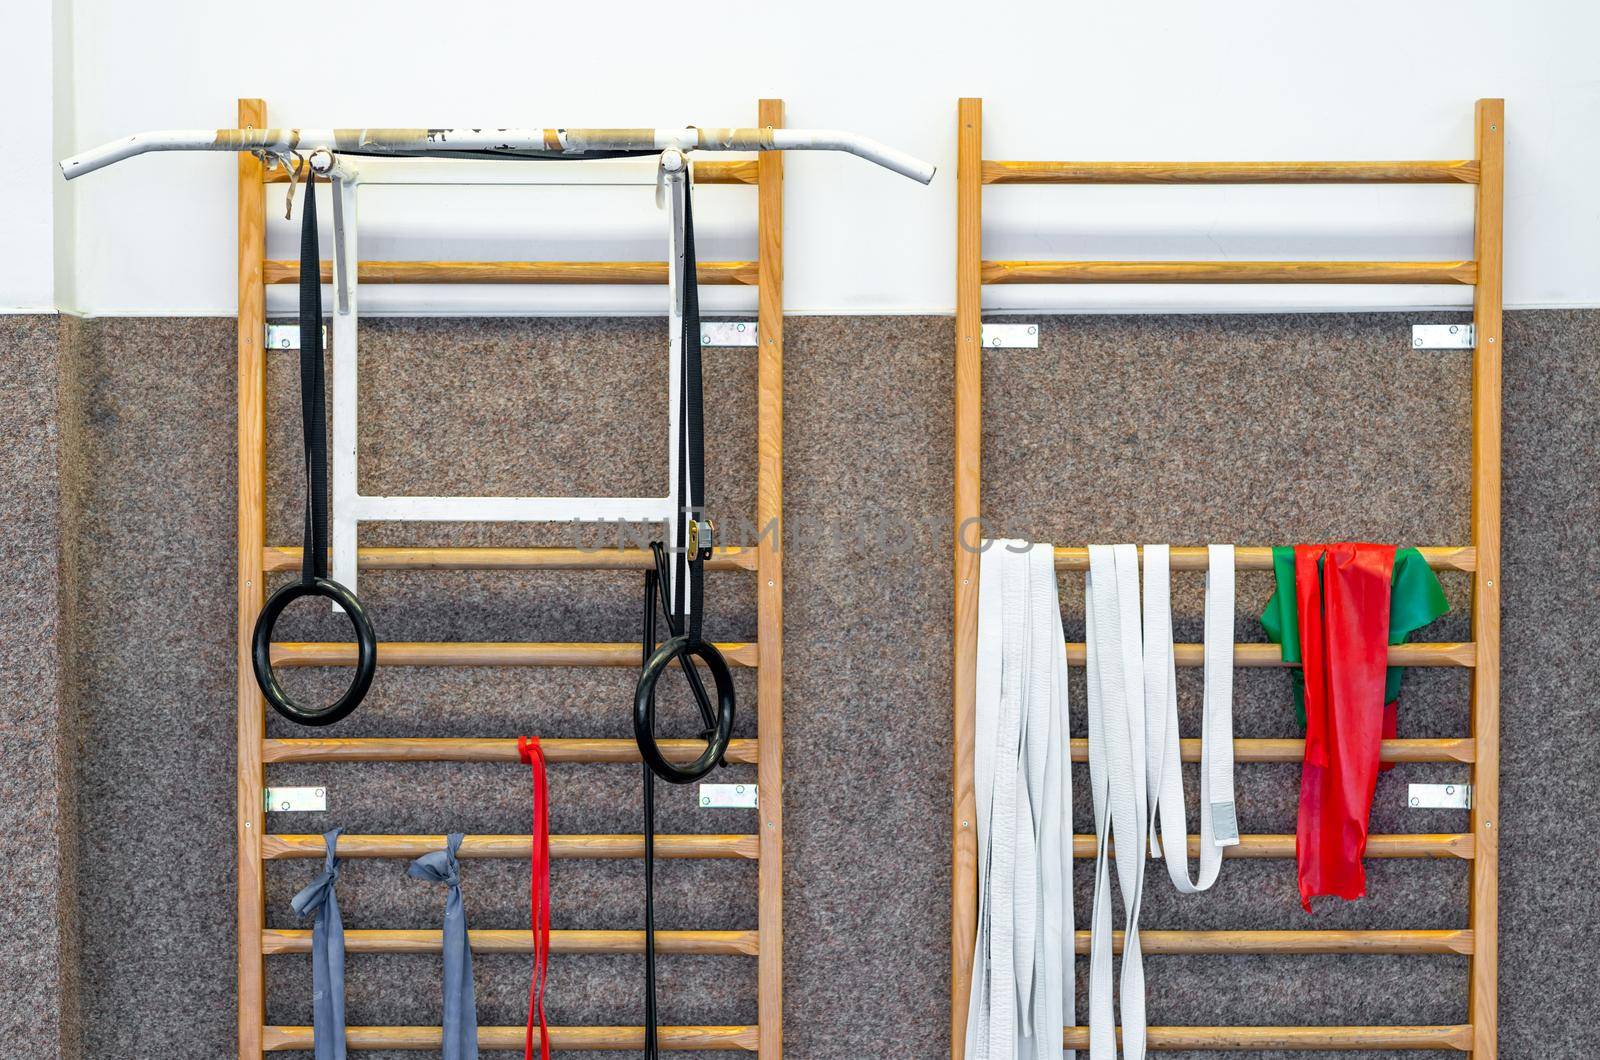 gymnastic equipment in the modern gym by Edophoto